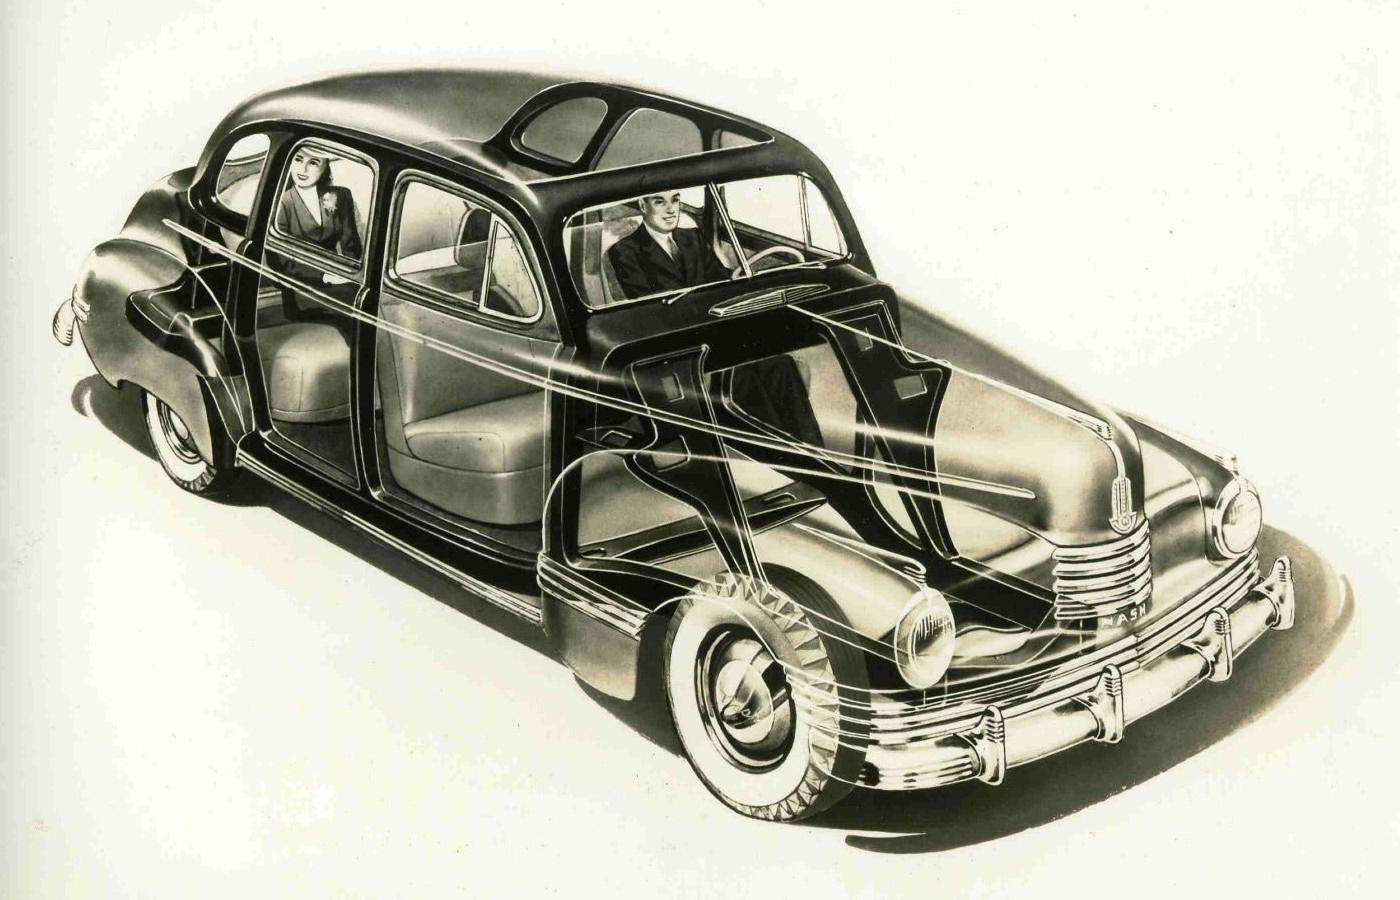 image showing an x-ray view of a Nash car interior